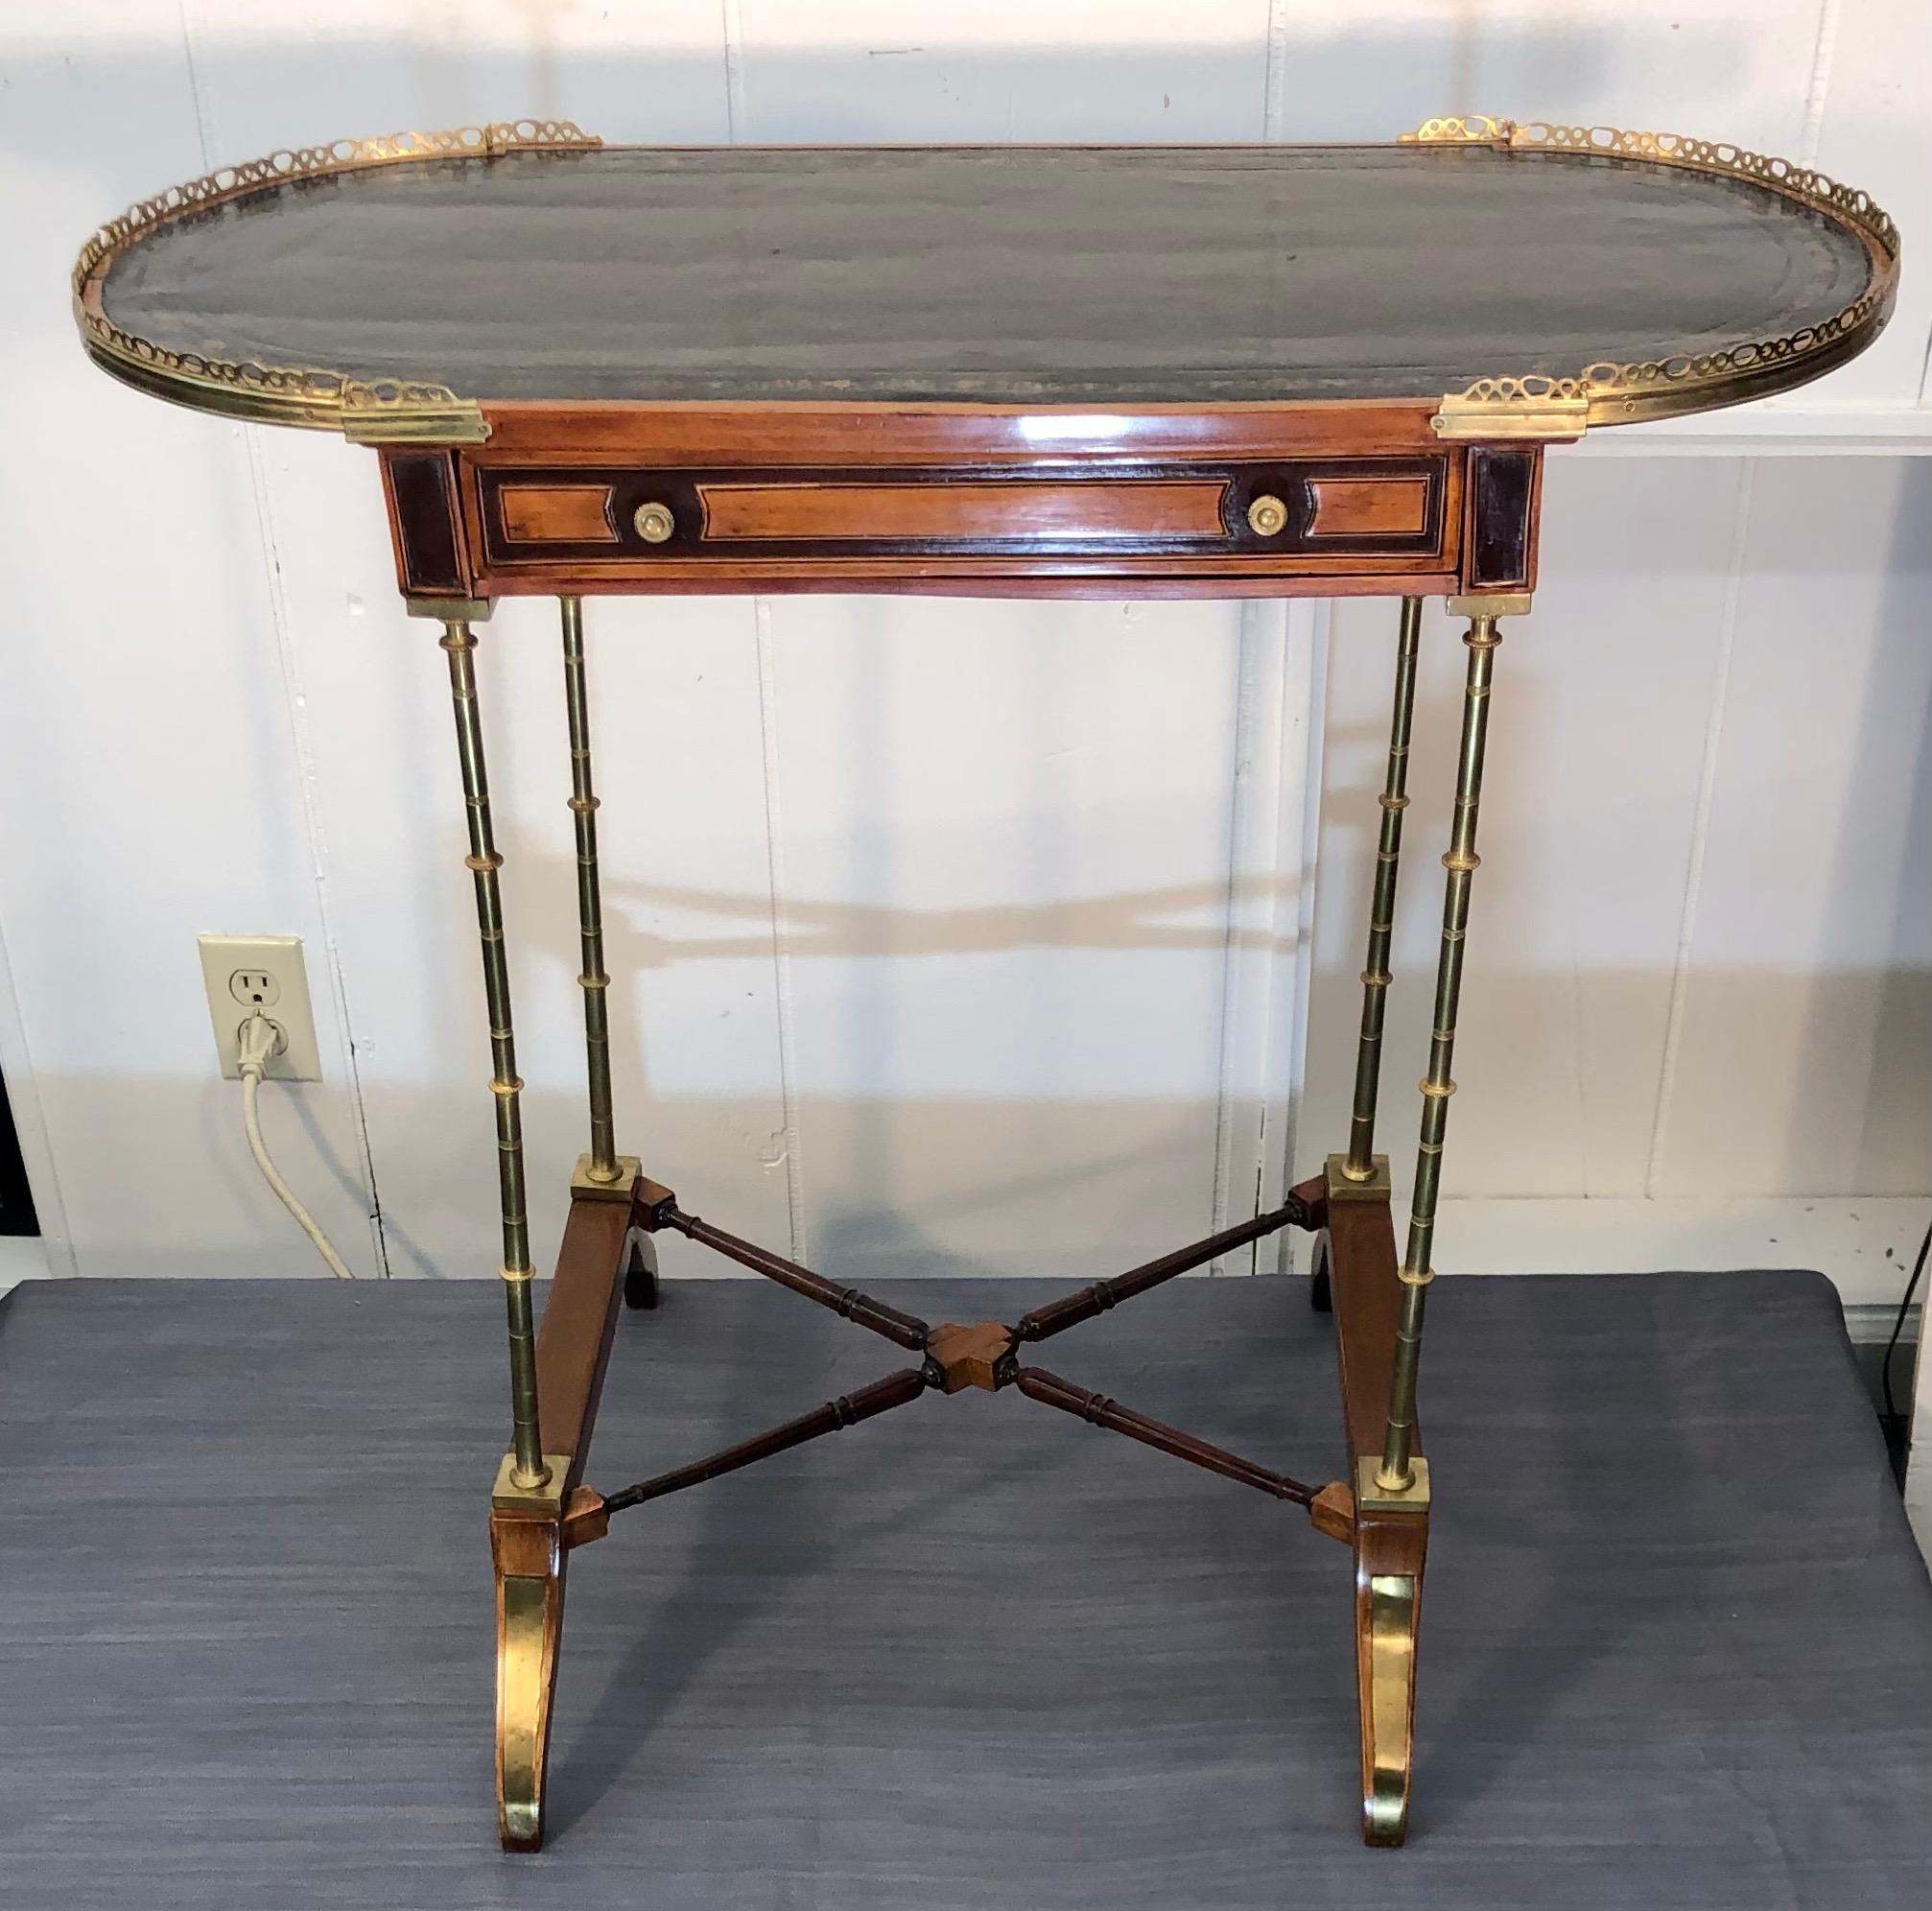 French Signed Adam Weisweiler Neoclassical Table With Faux Bamboo Columns, 18th Century